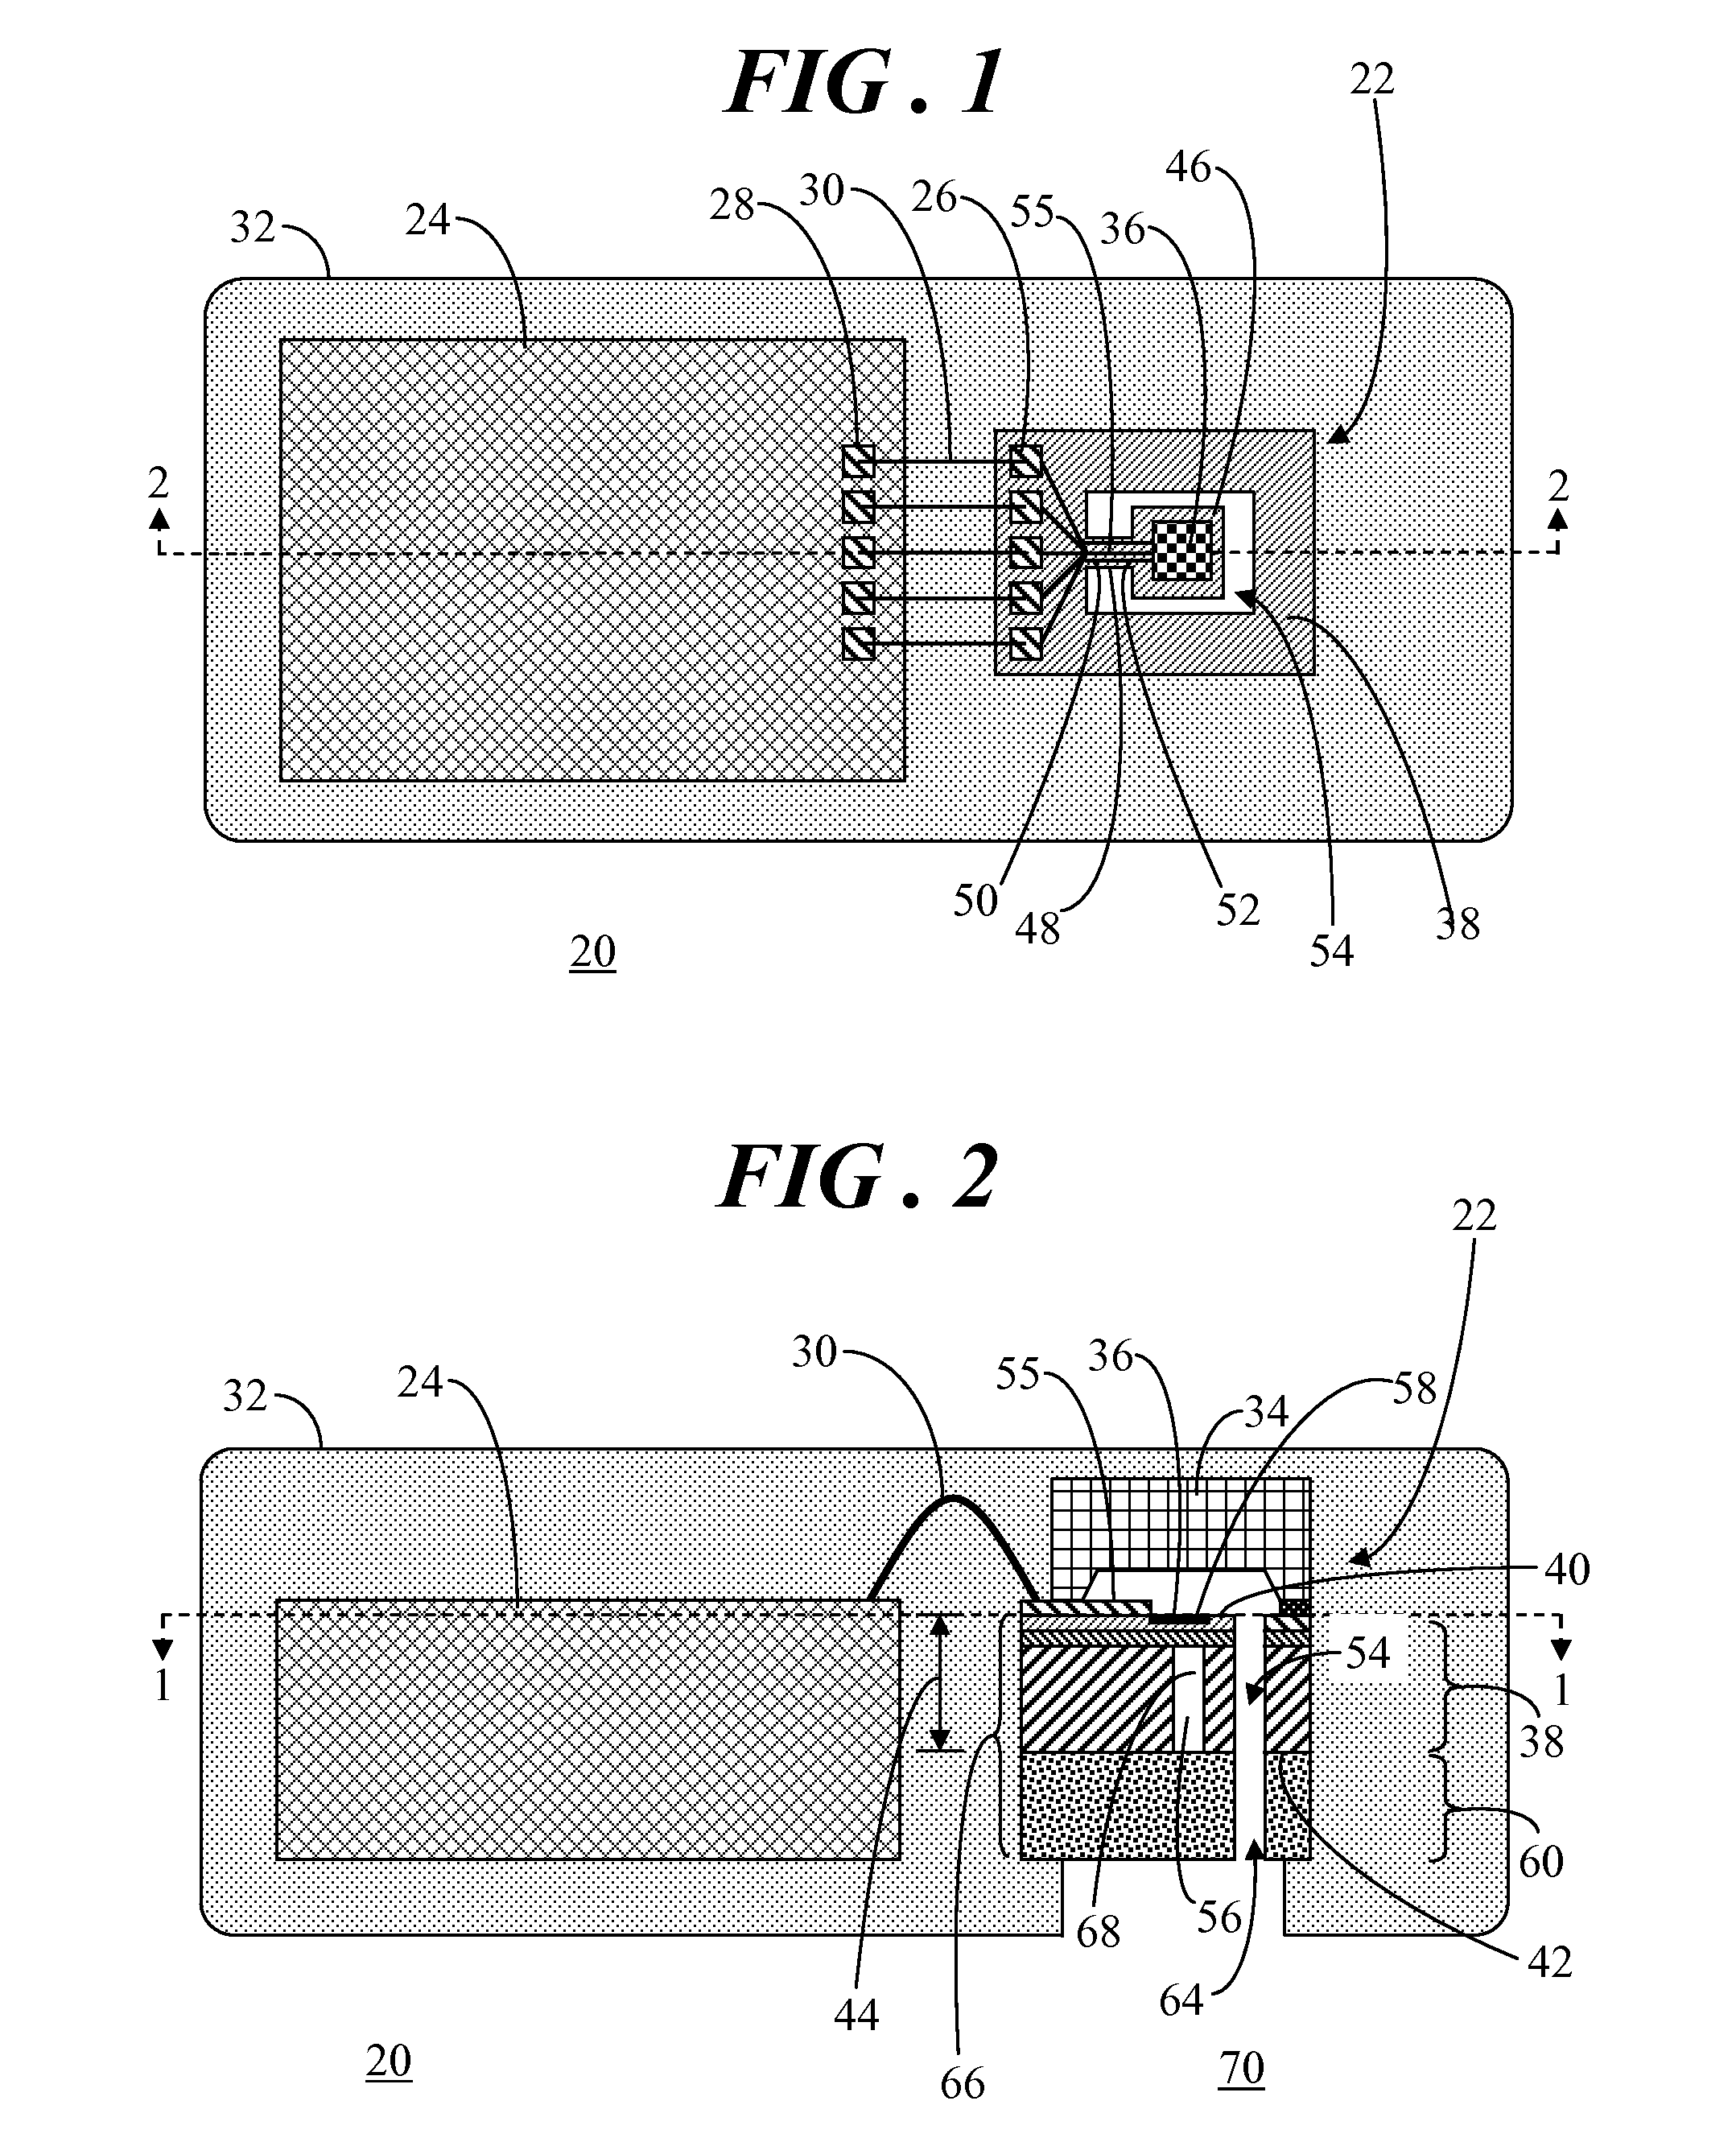 MEMS device assembly and method of packaging same